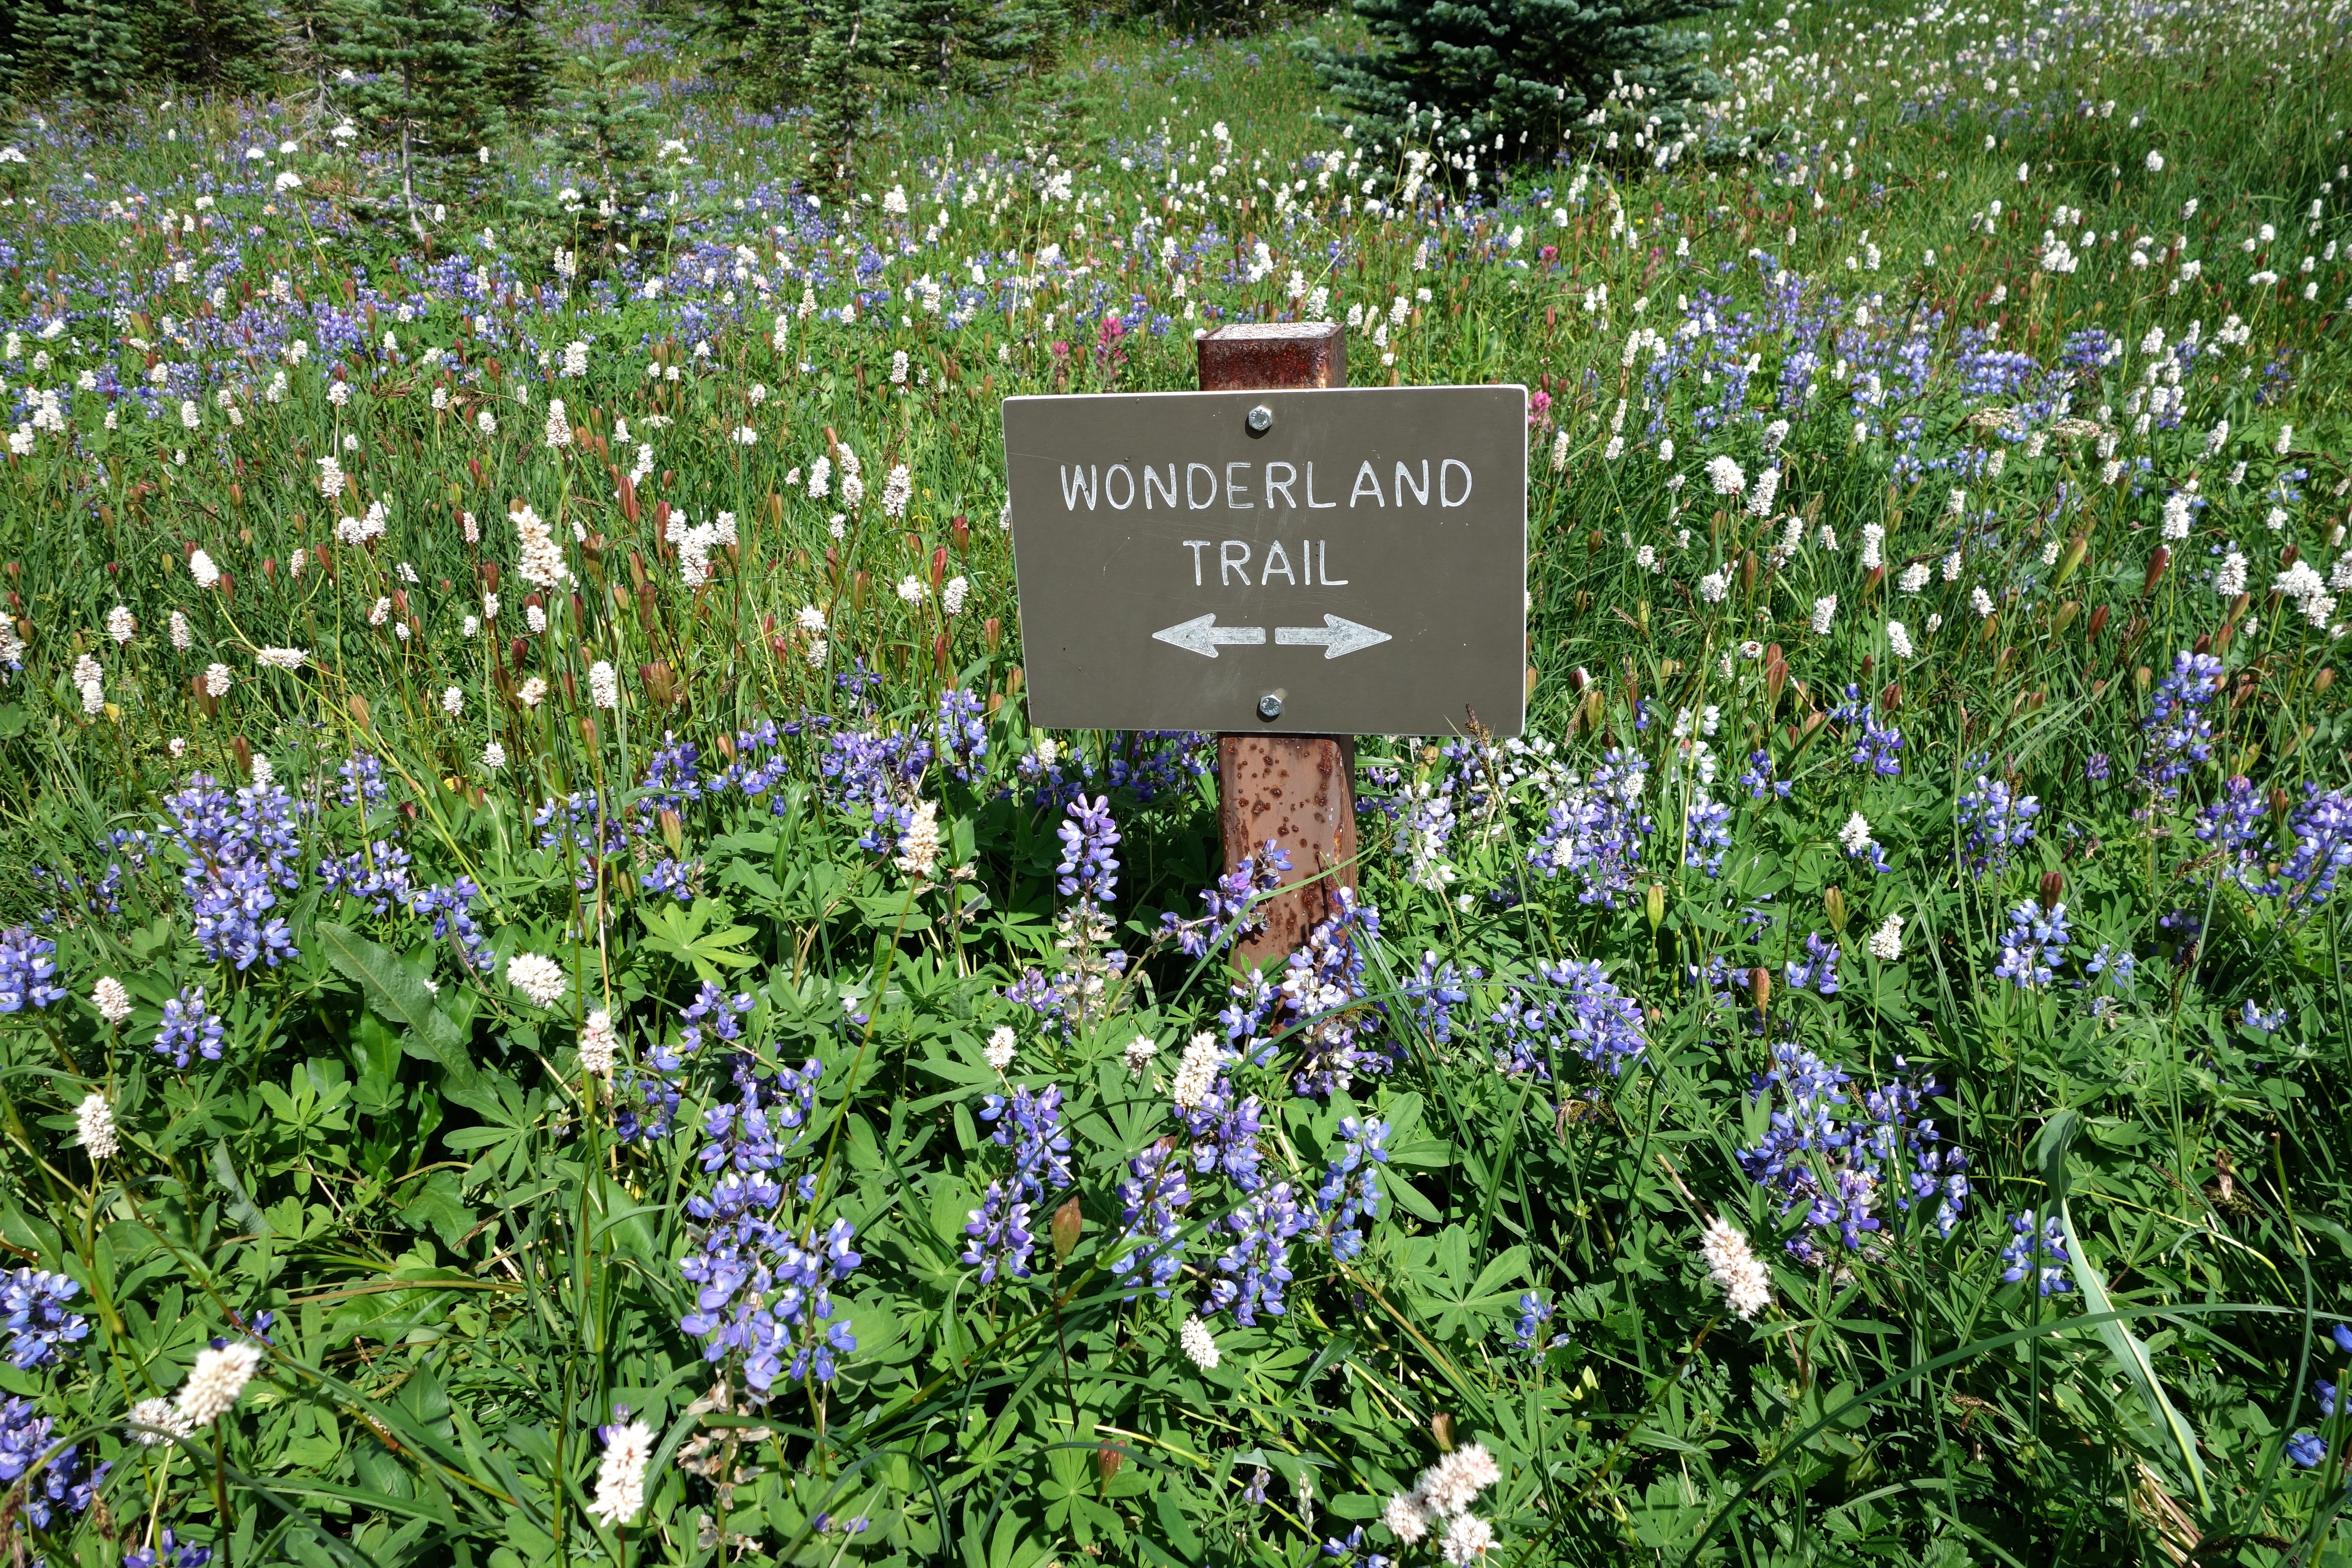 Purple lupine and white bistort bloom in a meadow alongside a sign for the Wonderland Trail.